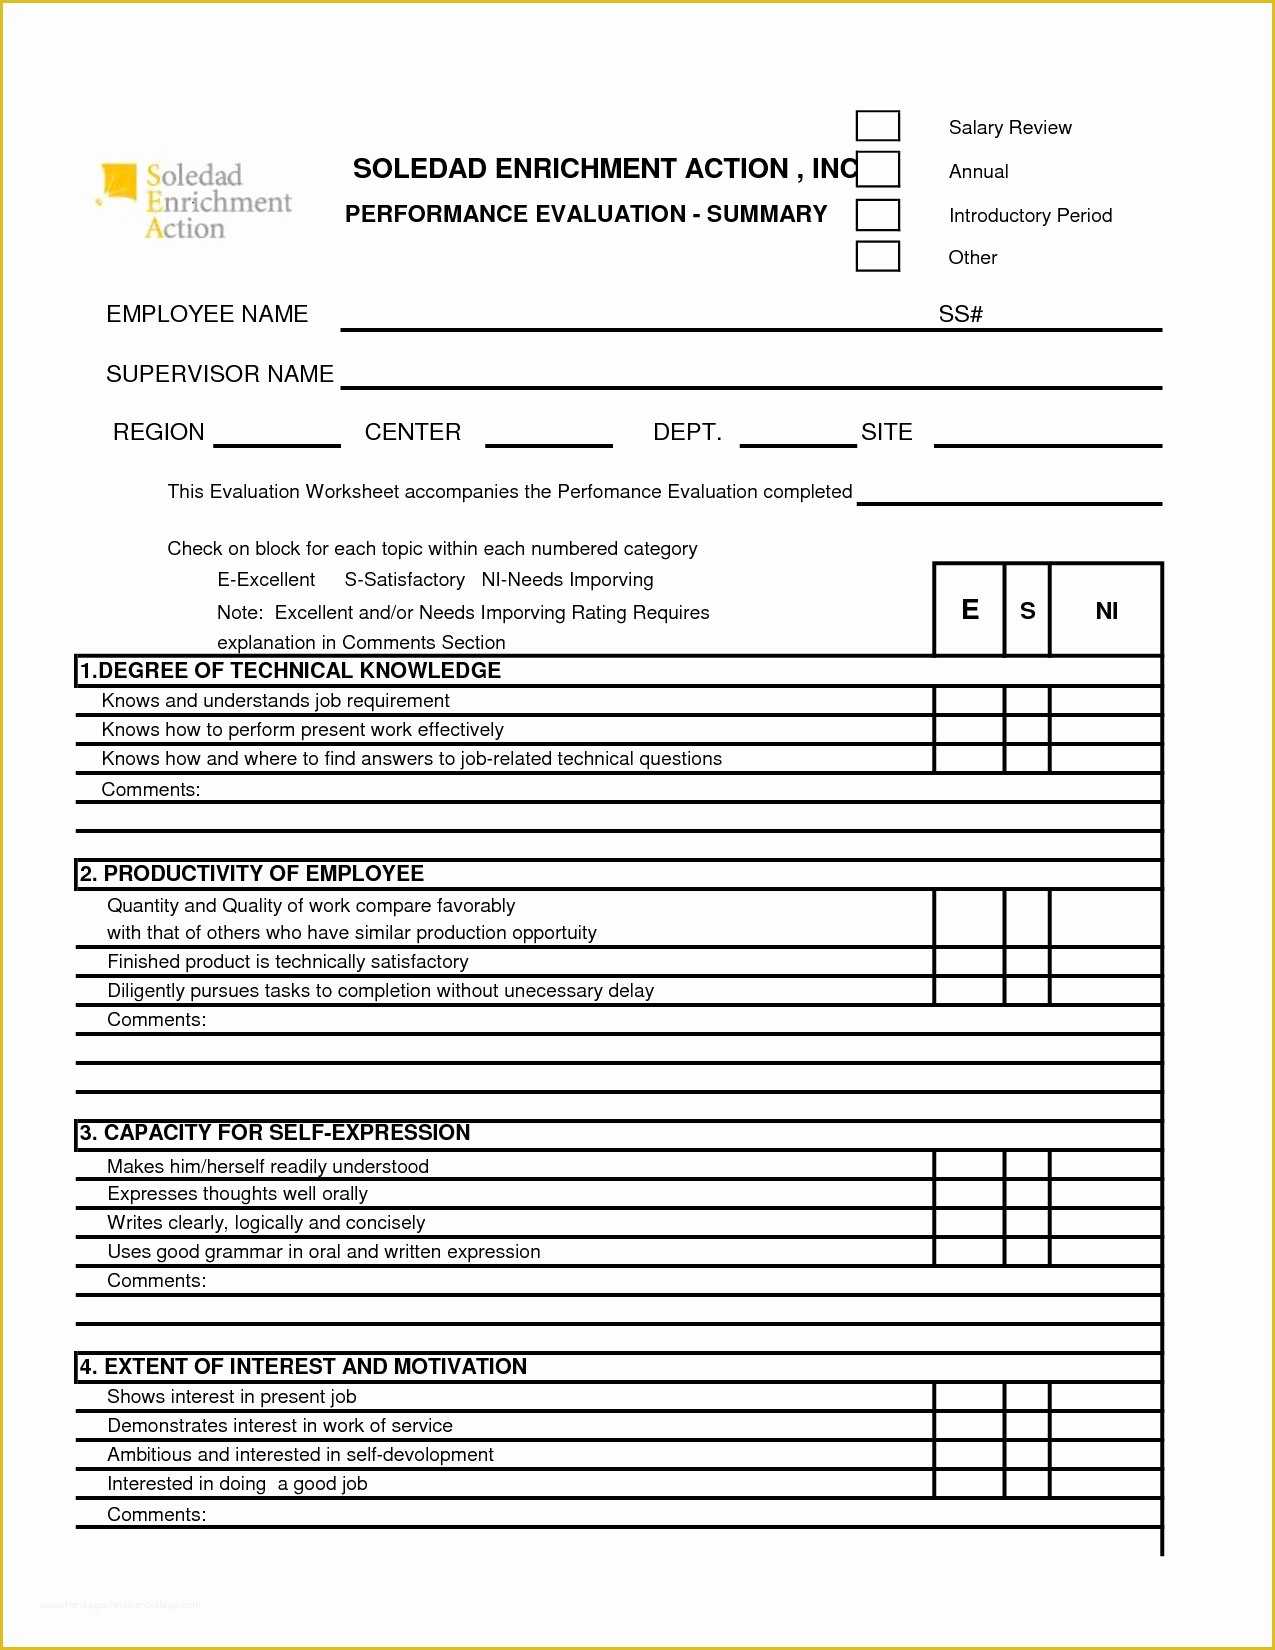 360 Degree Performance Appraisal Template Free Of Free 360 Performance Appraisal form Google Search